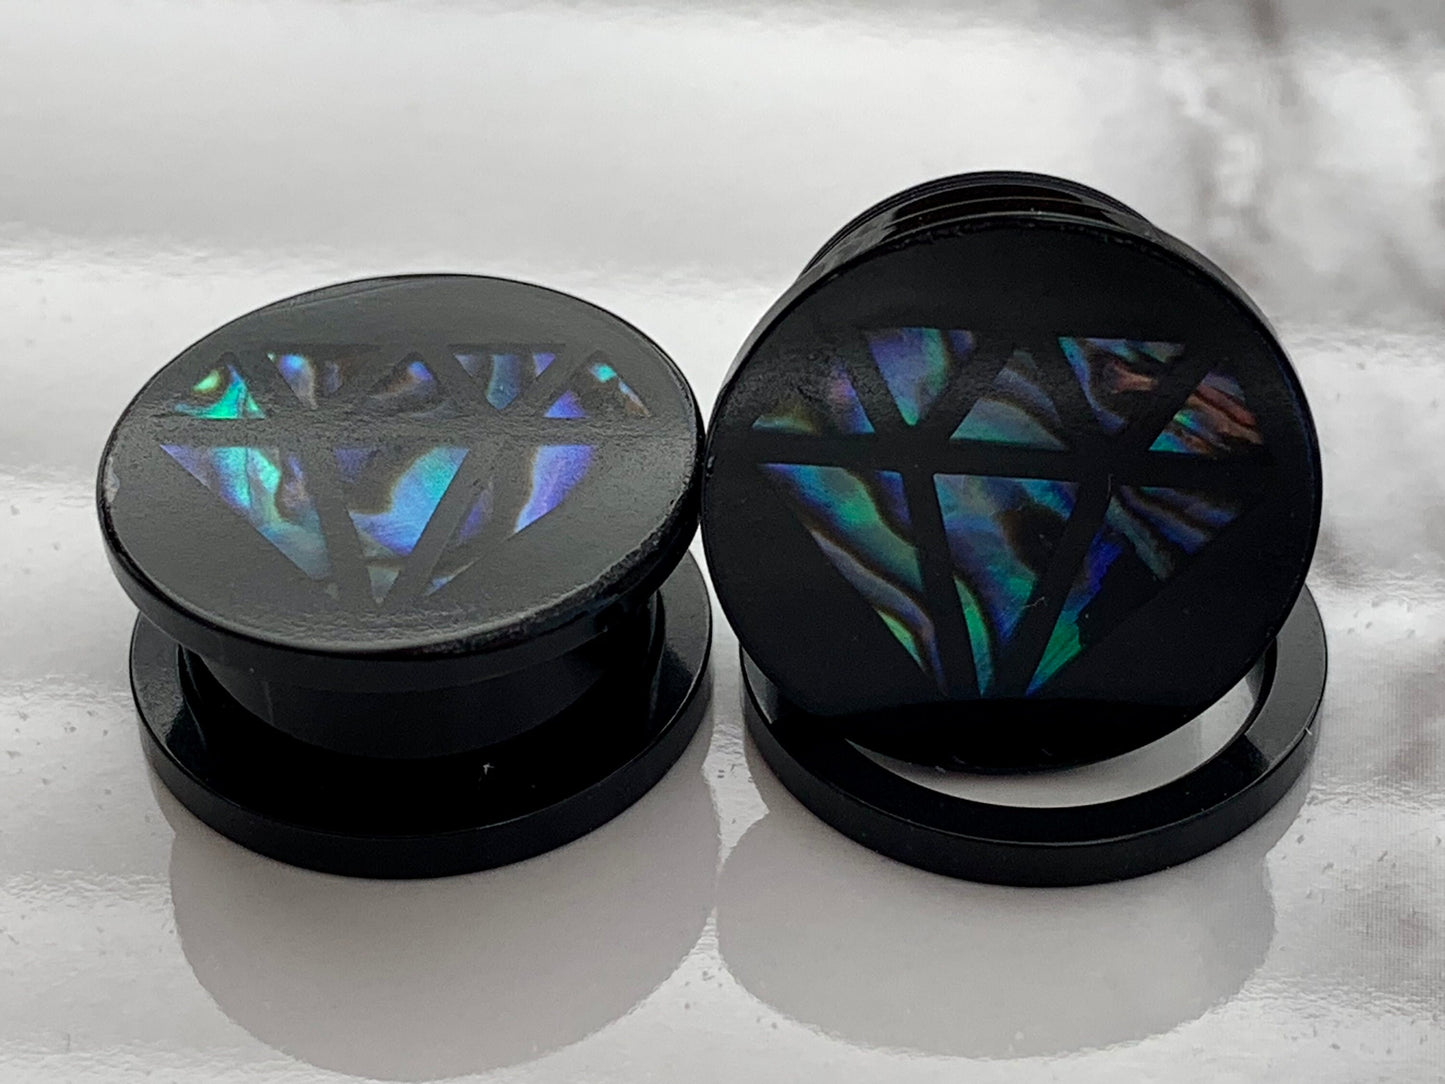 PAIR of Unique Diamond-Shaped Abalone Inlay Acrylic Screw Fit Plugs - Gauges 0g (8mm) thru 5/8" (16mm) available!